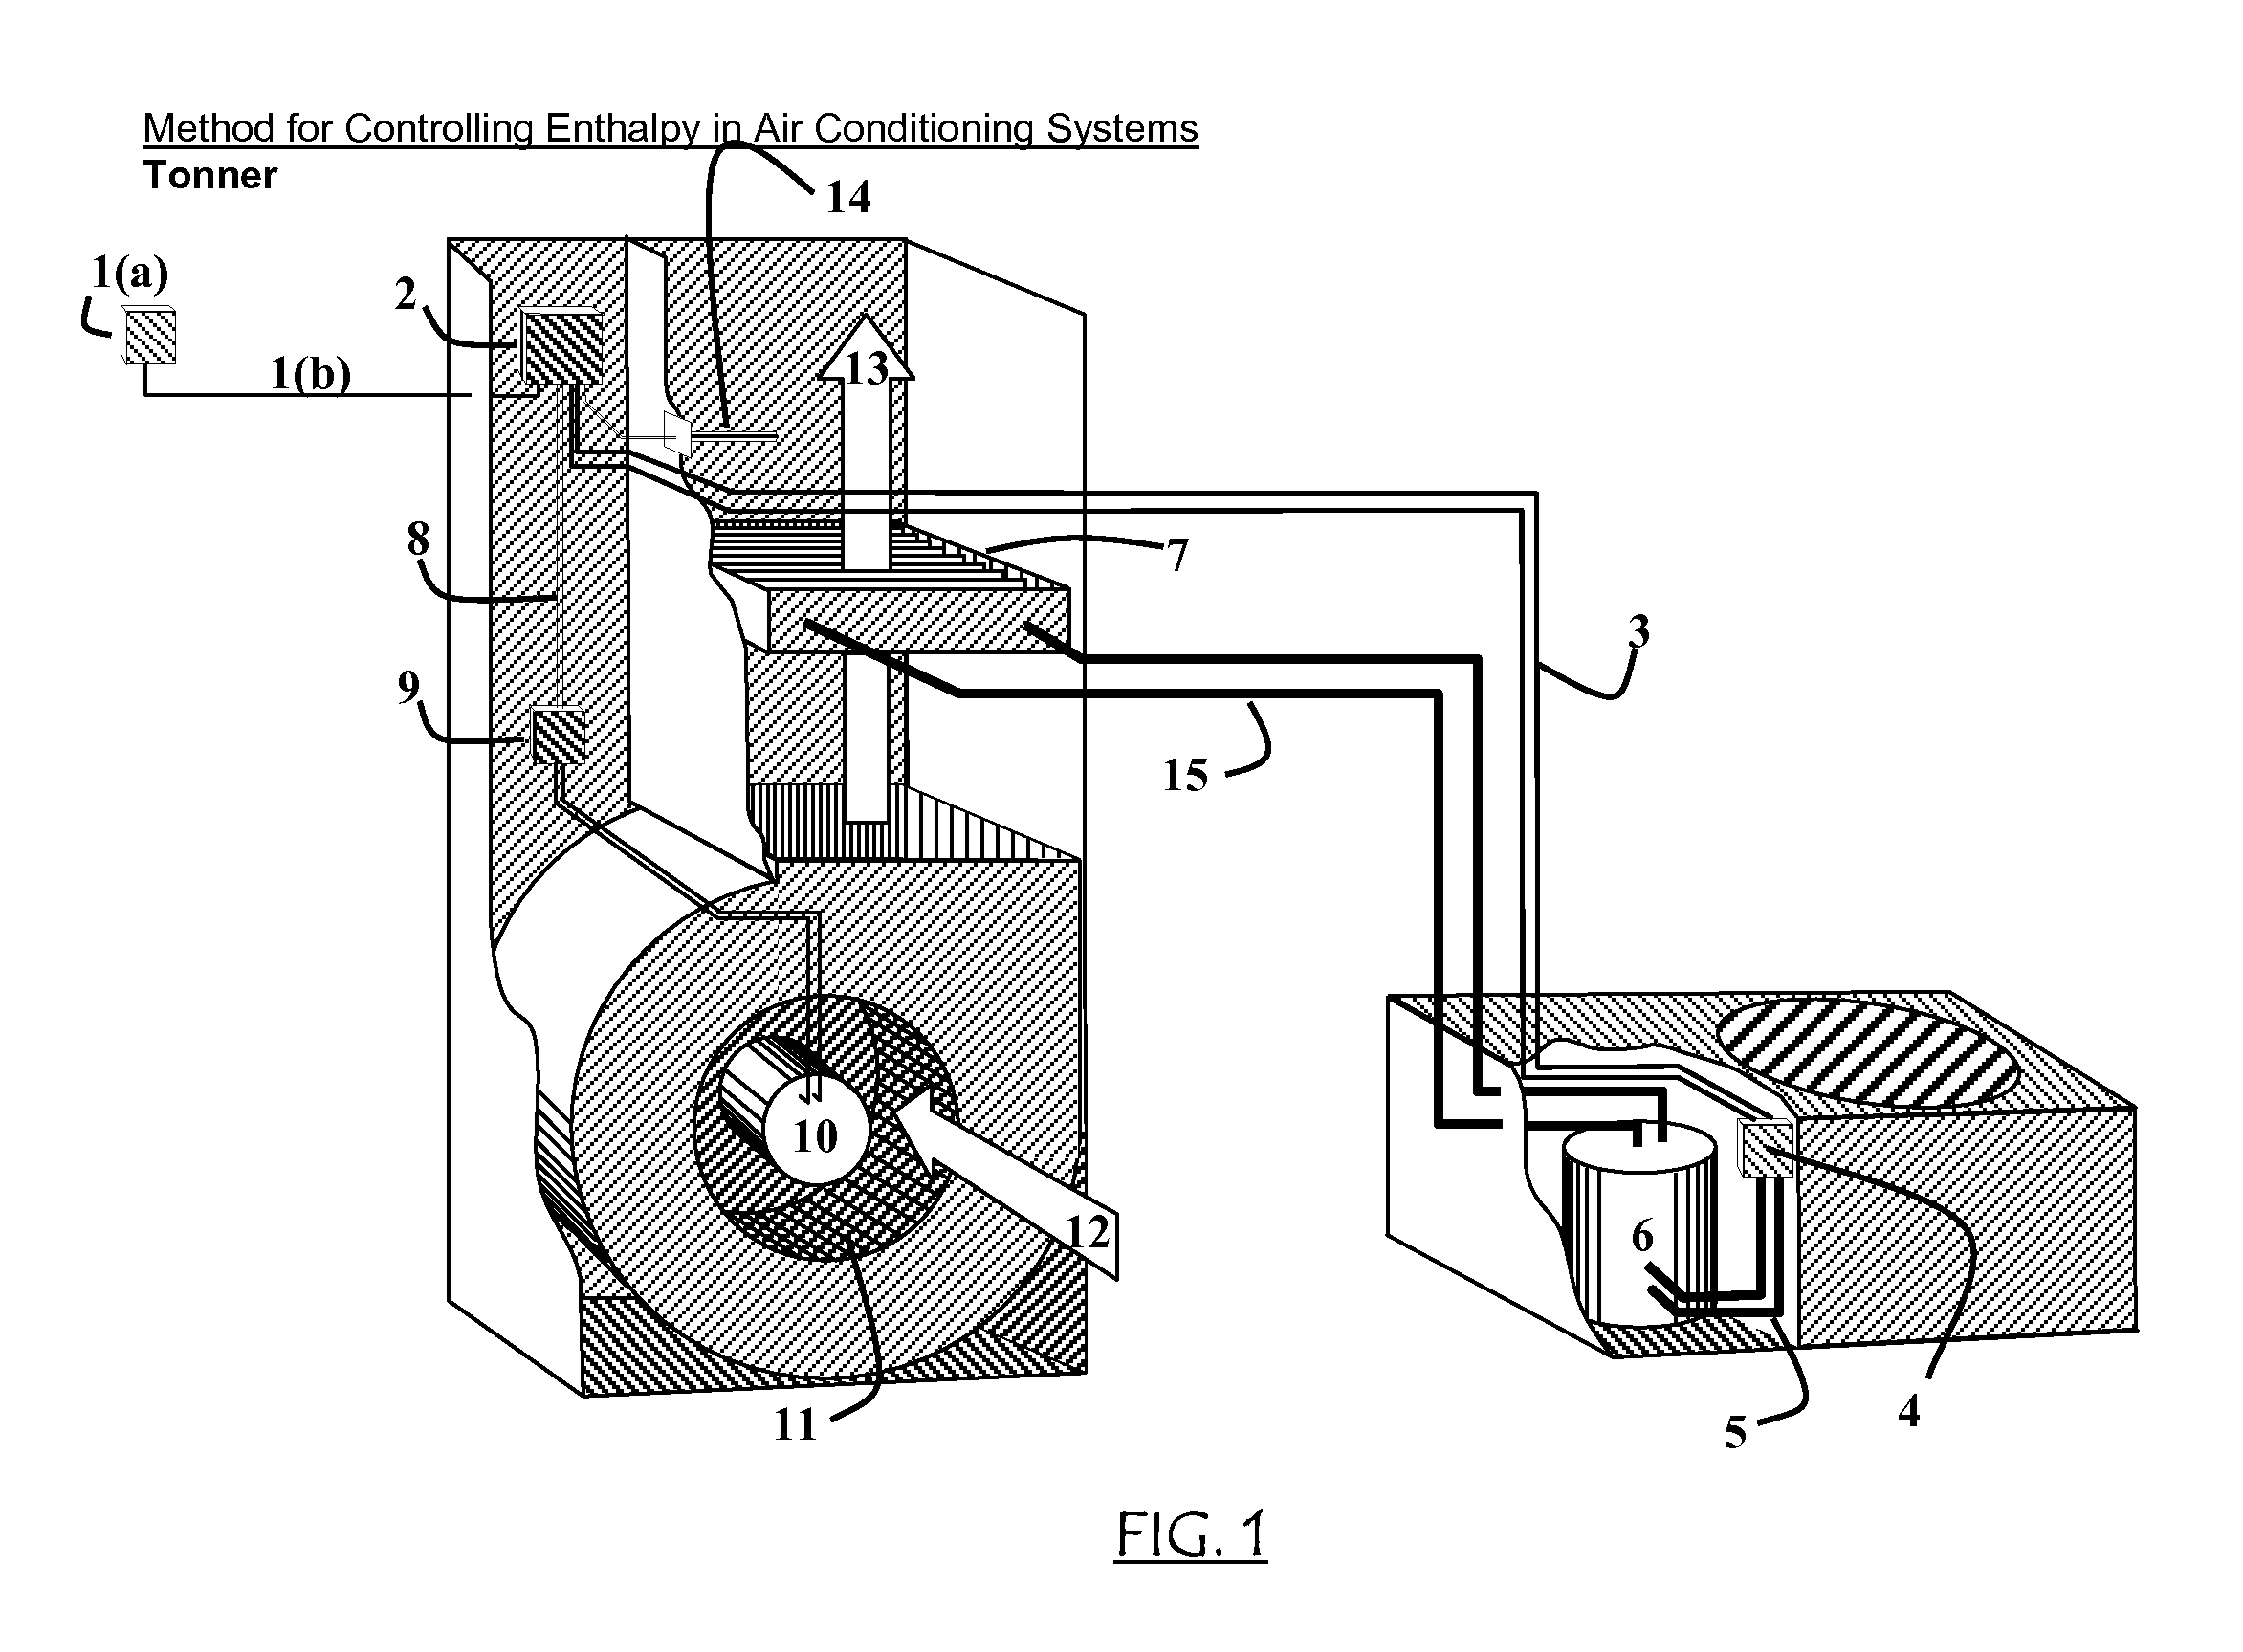 Method for controlling enthalpy in air conditioning systems